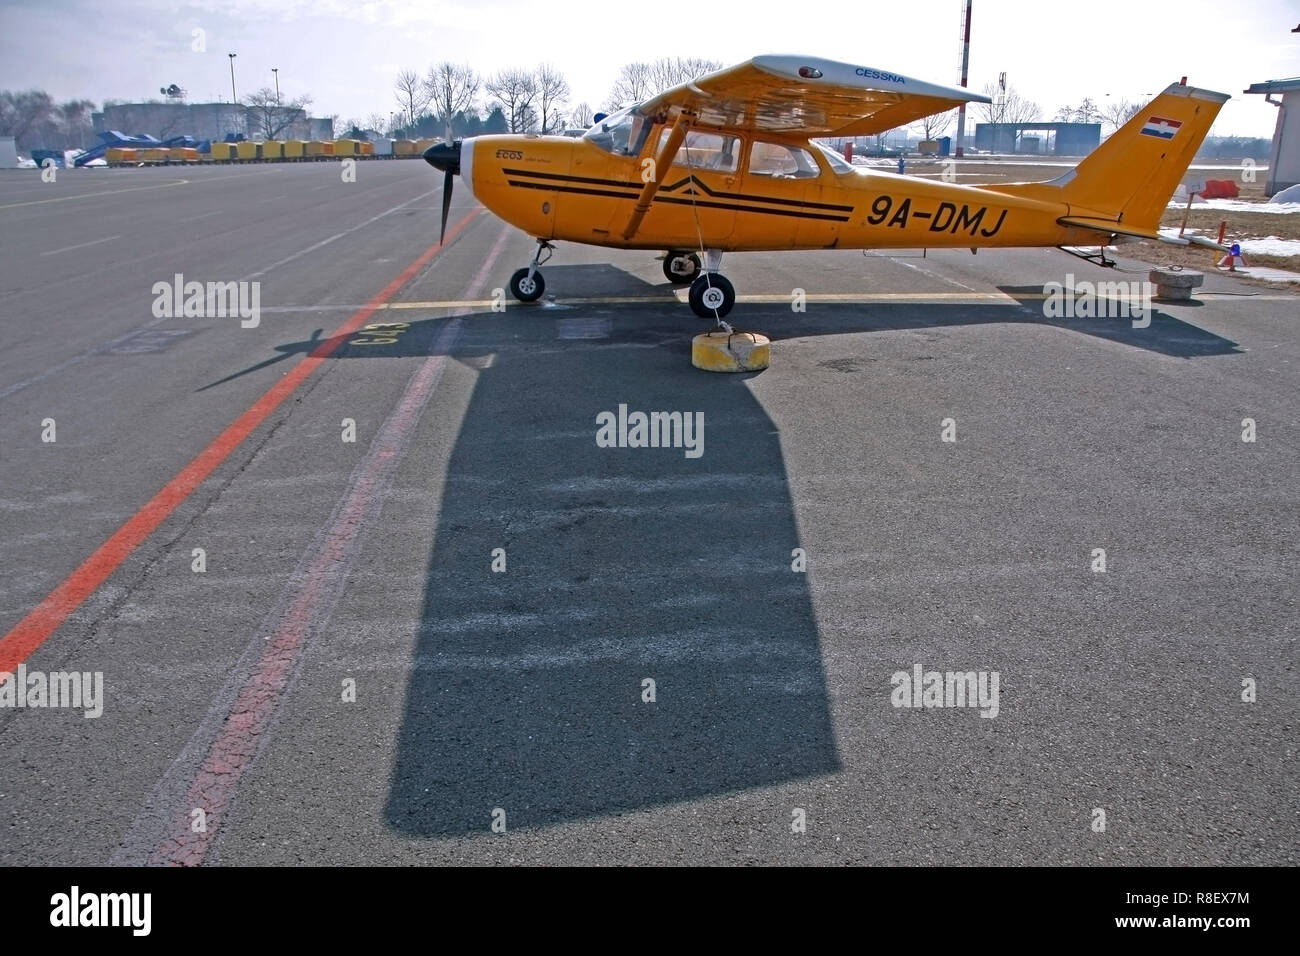 Zagreb, Croatia - February 25, 2012: Cessna airplane at the airport in the Zagreb Stock Photo